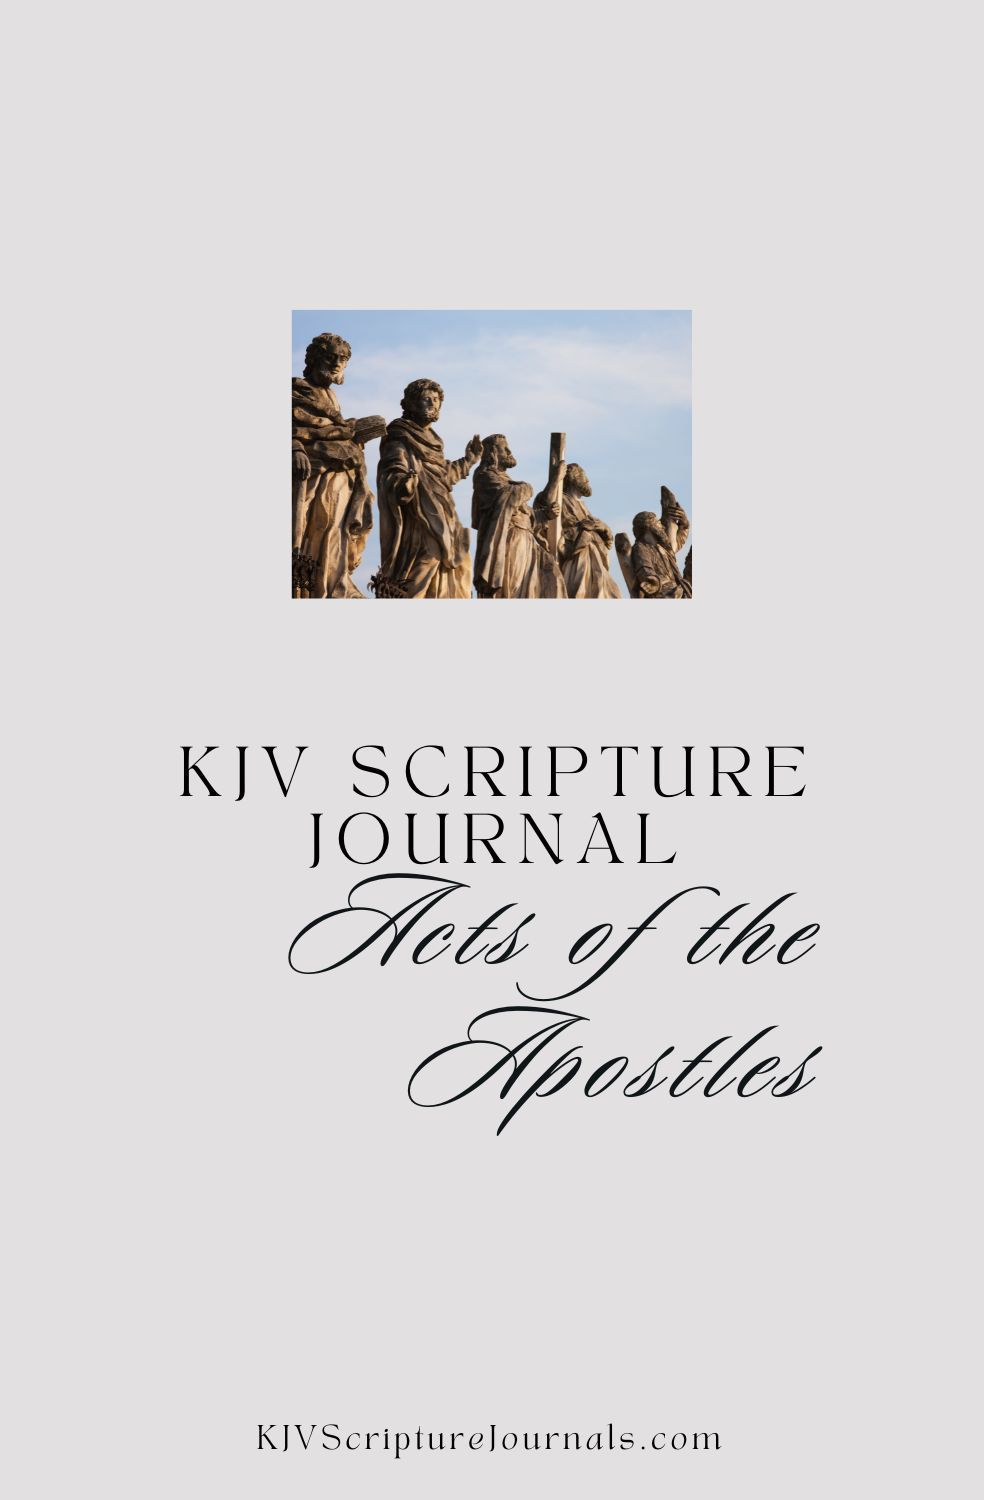 KJV Scripture Journal: Acts of the Apostles